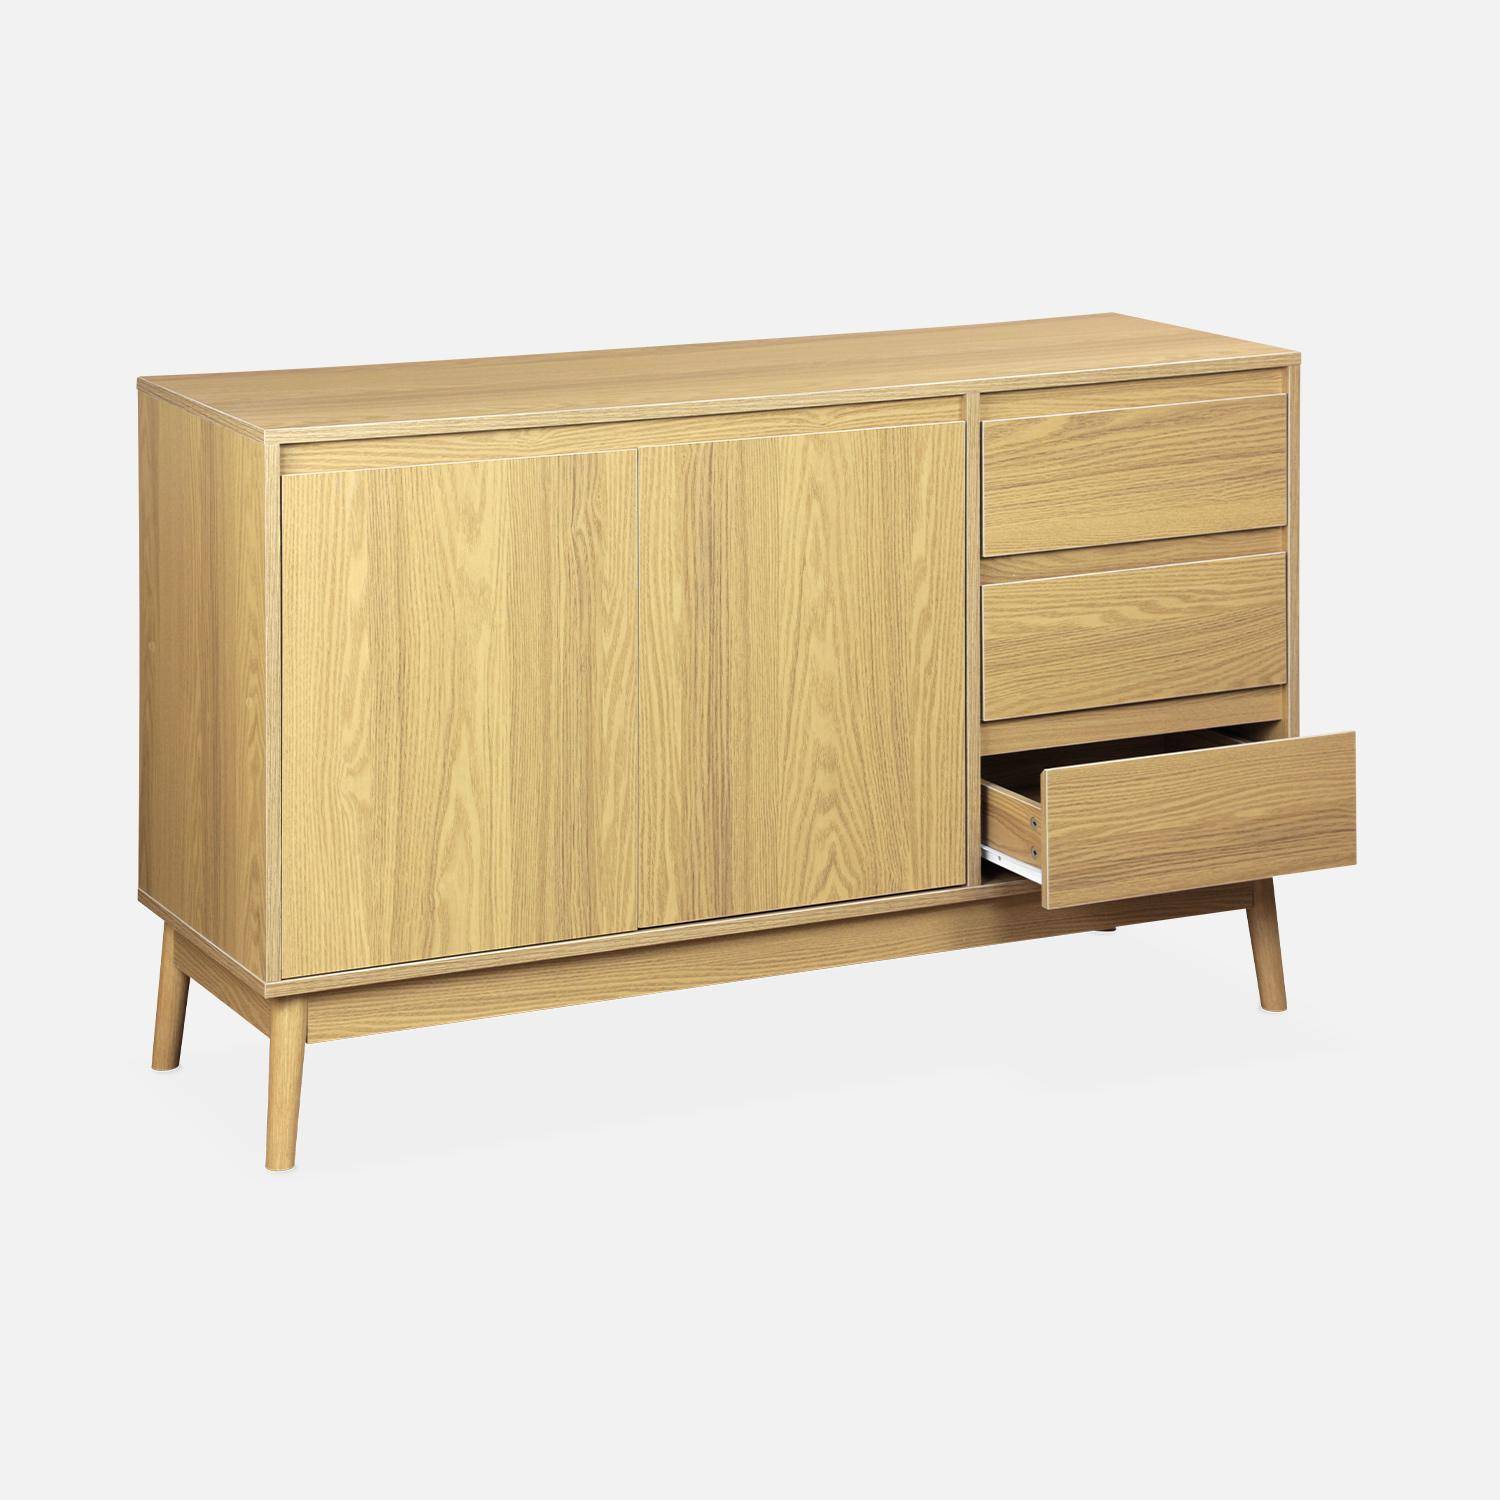 Wooden sideboard with 2 doors and 3 drawers L 120 x W 39 H 76cm - Dune,sweeek,Photo5